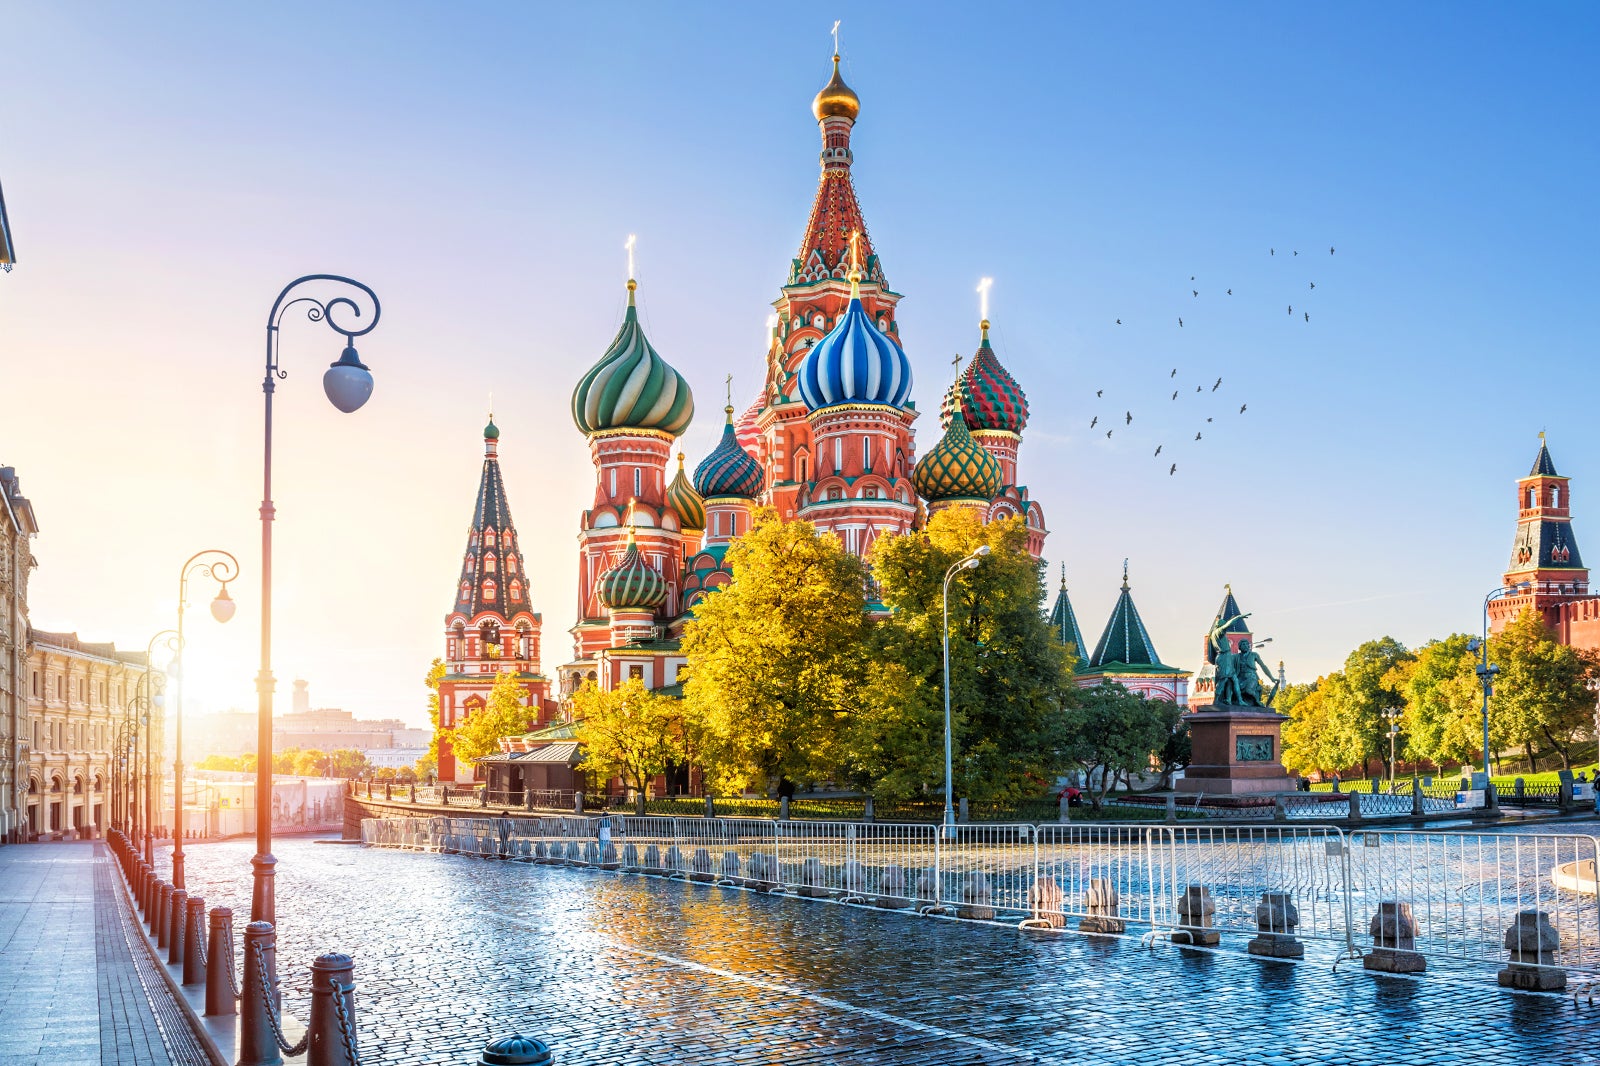 Lots of such lamps and birds are seen flying in the river and Participate in St. Part of the Basil's Cathedral and the Kremlin